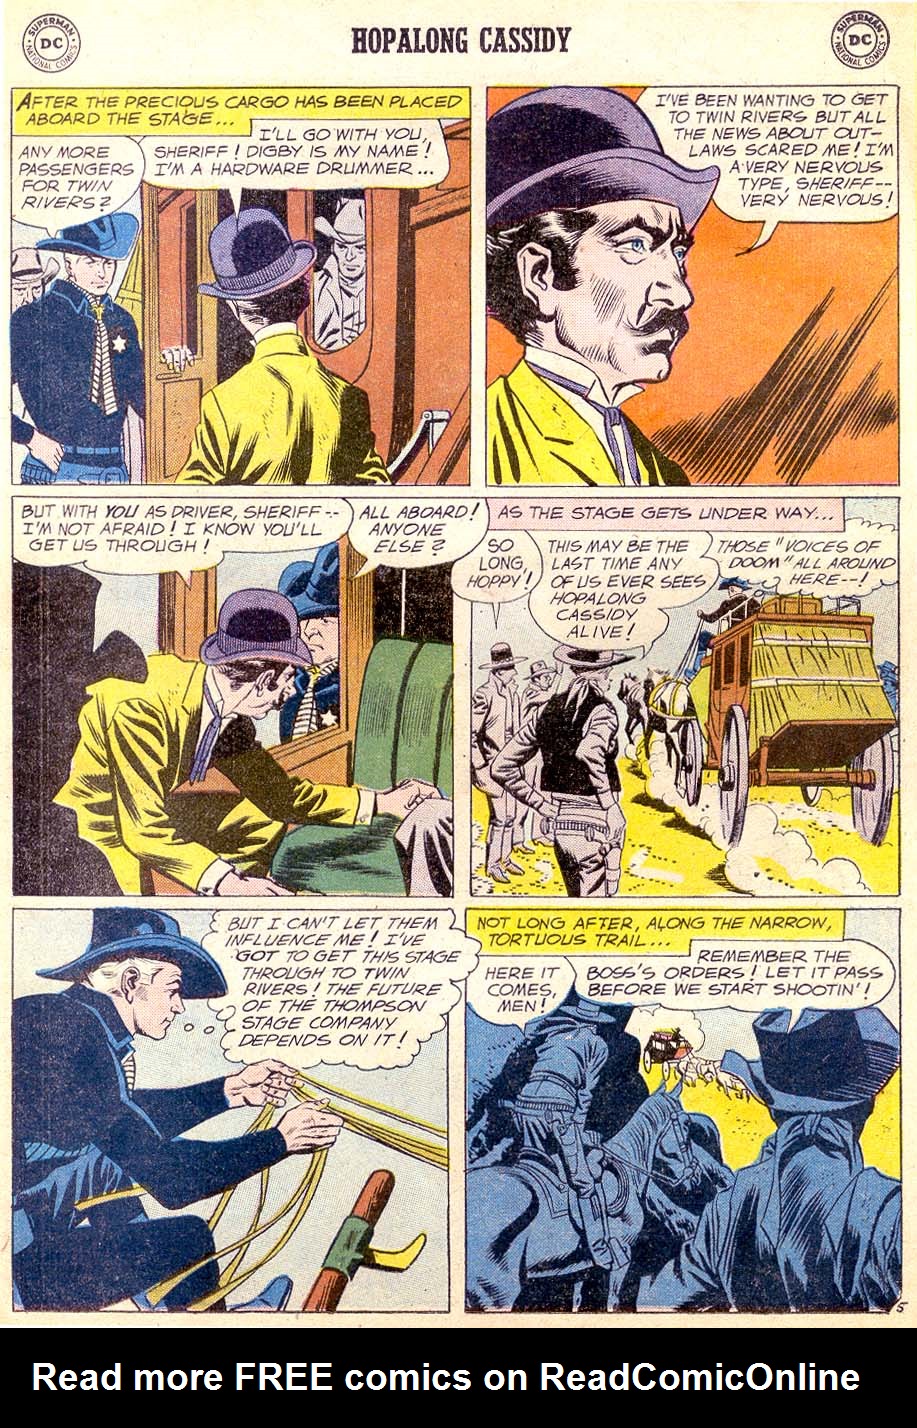 Read online Hopalong Cassidy comic -  Issue #133 - 7